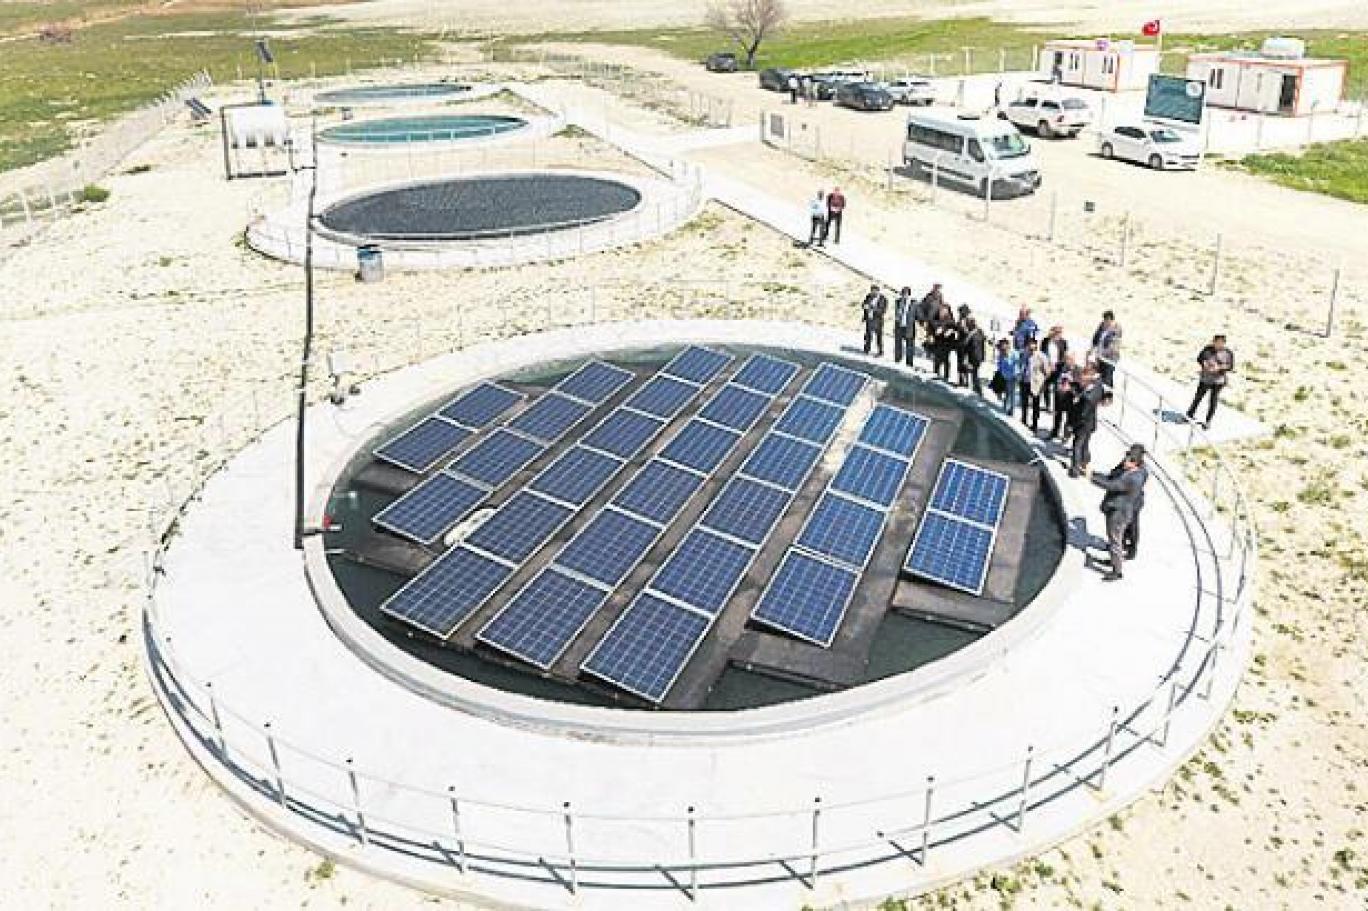 Solar panels may be installed on lakes to reduce evaporation